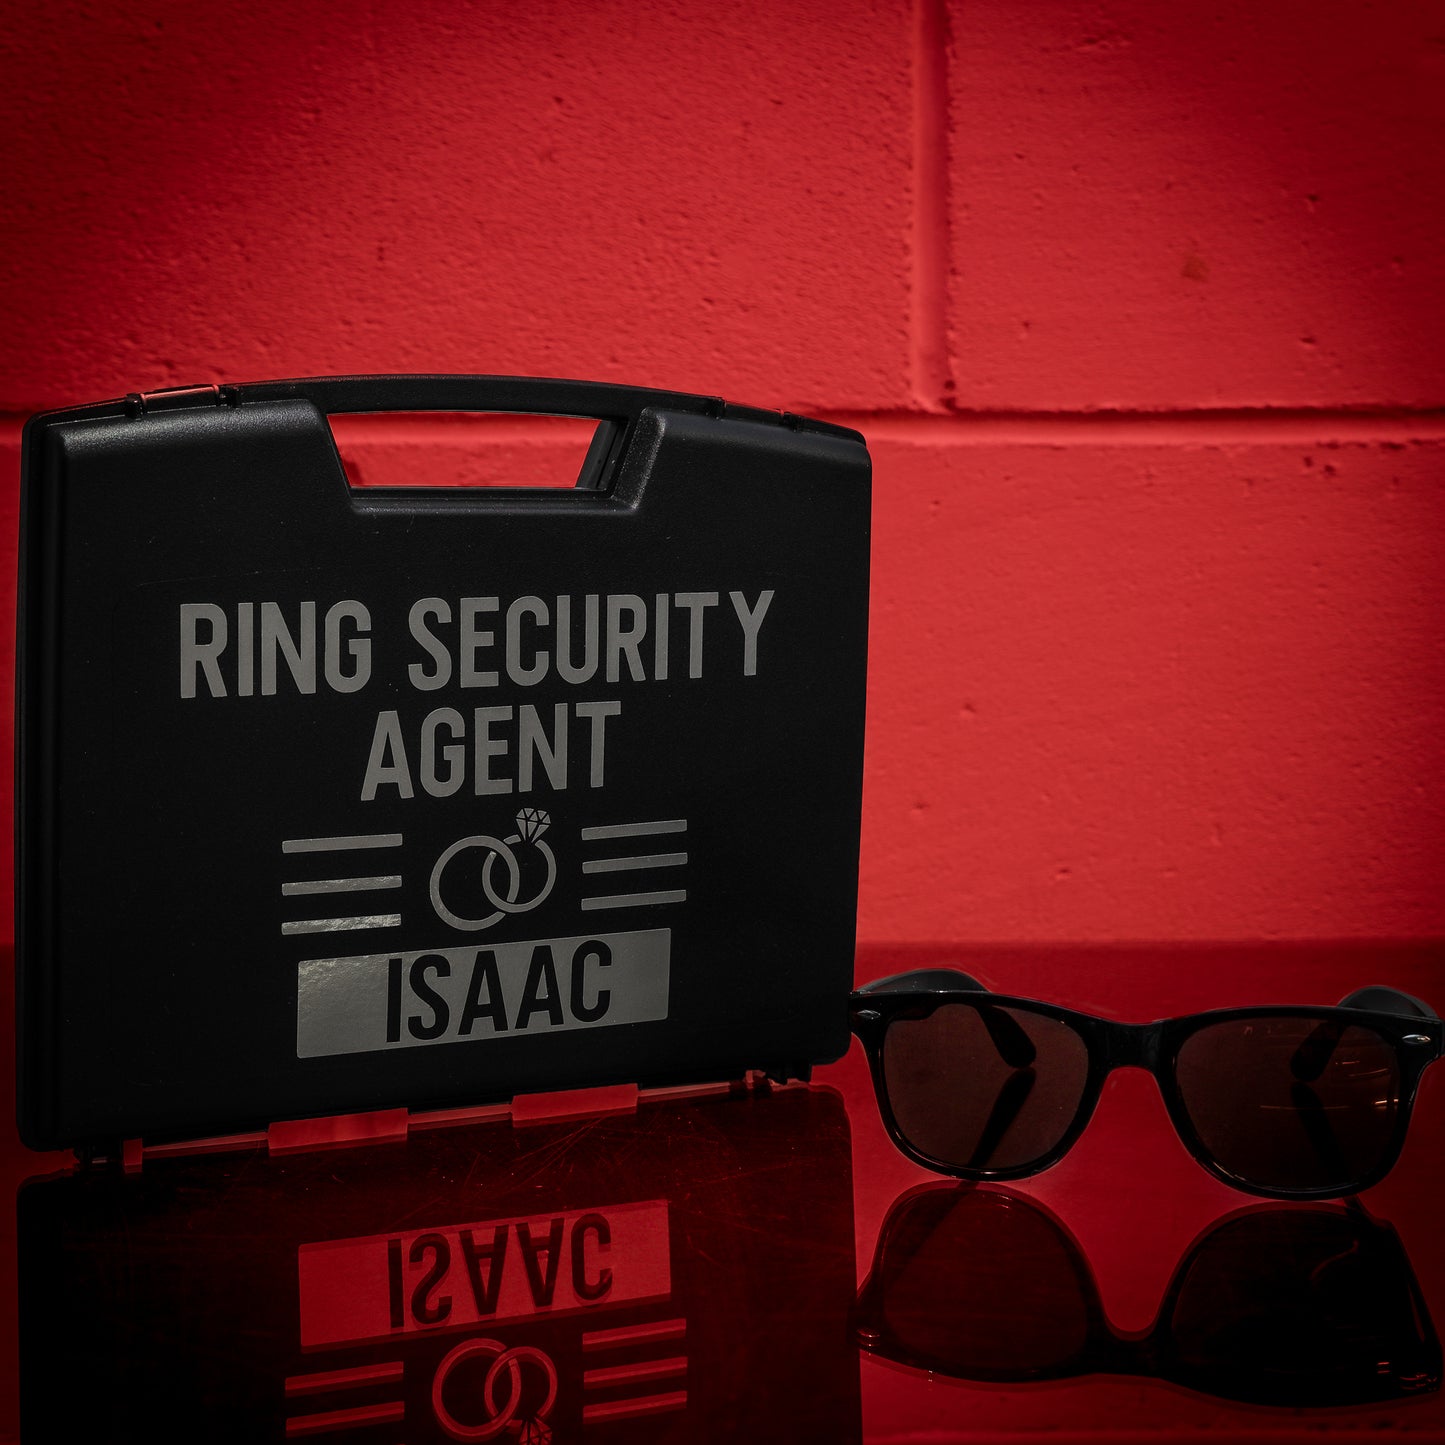 Personalised Pageboy Ring Security Box Briefcase  - Always Looking Good - Briefcase and sunglasses  